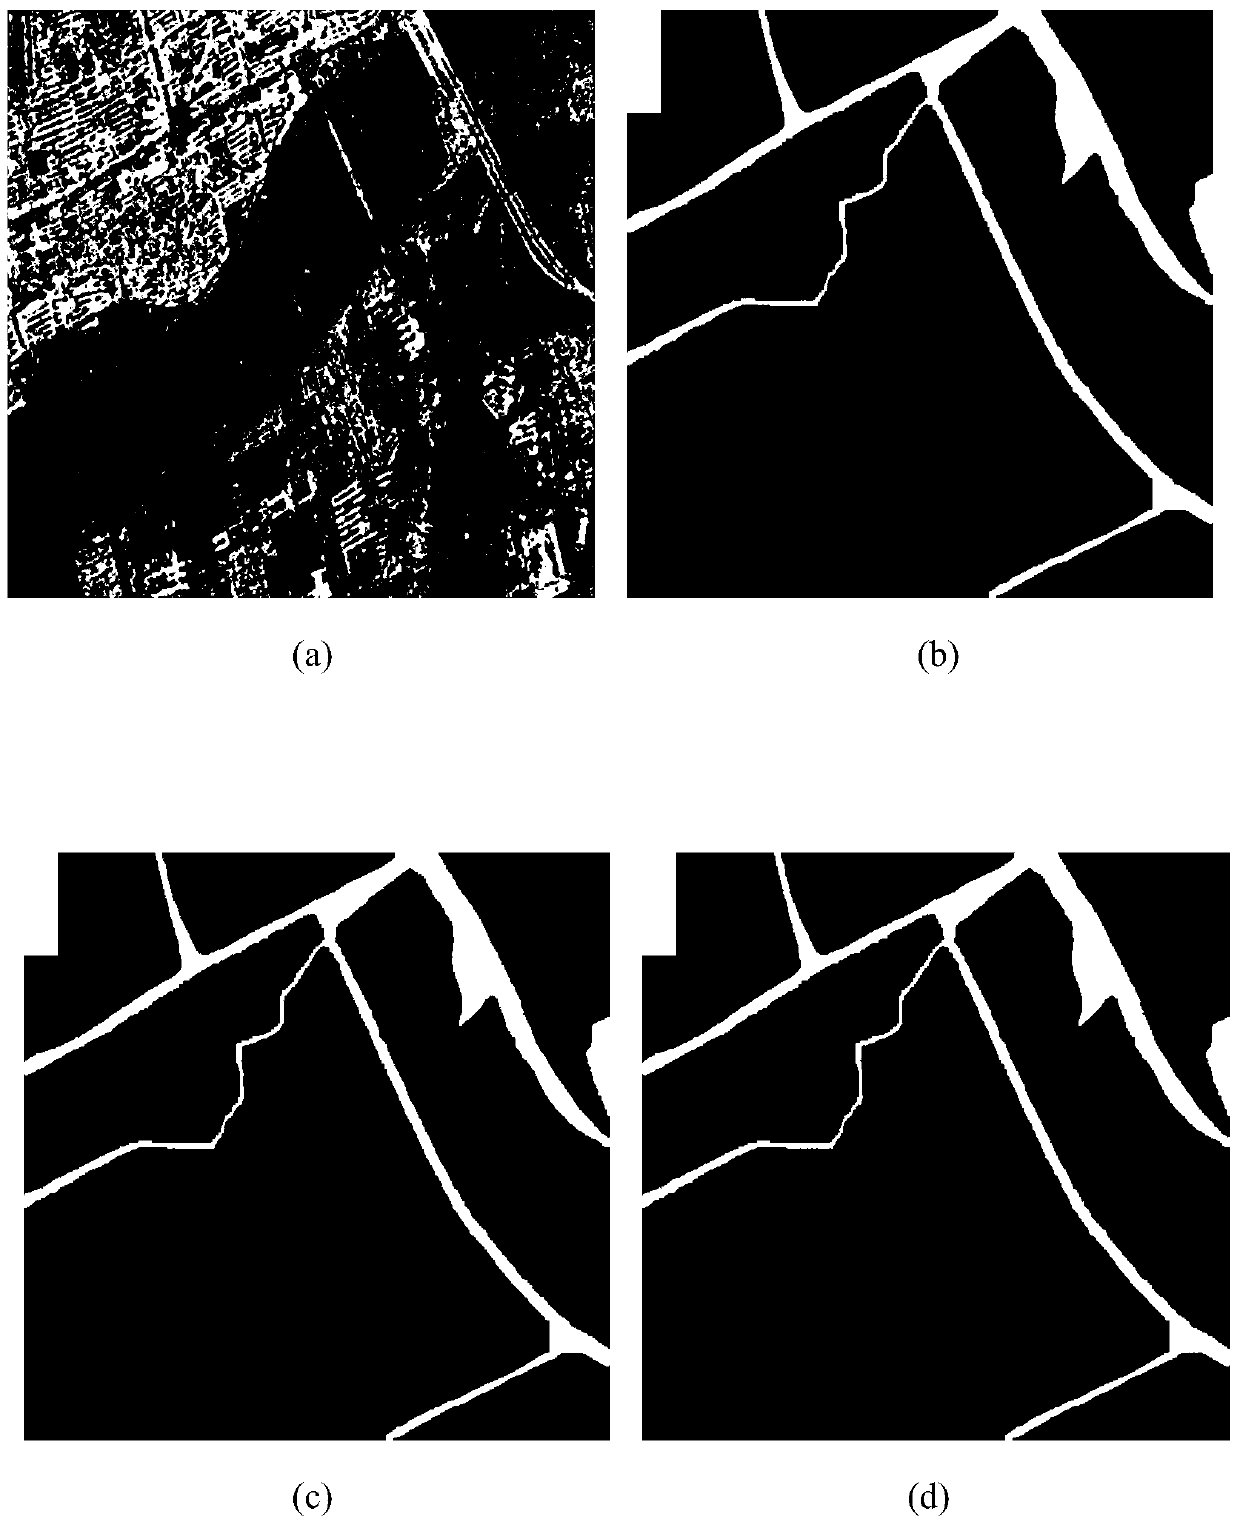 Polarized SAR Image Classification Method Based on Sparse Deep Stack Network